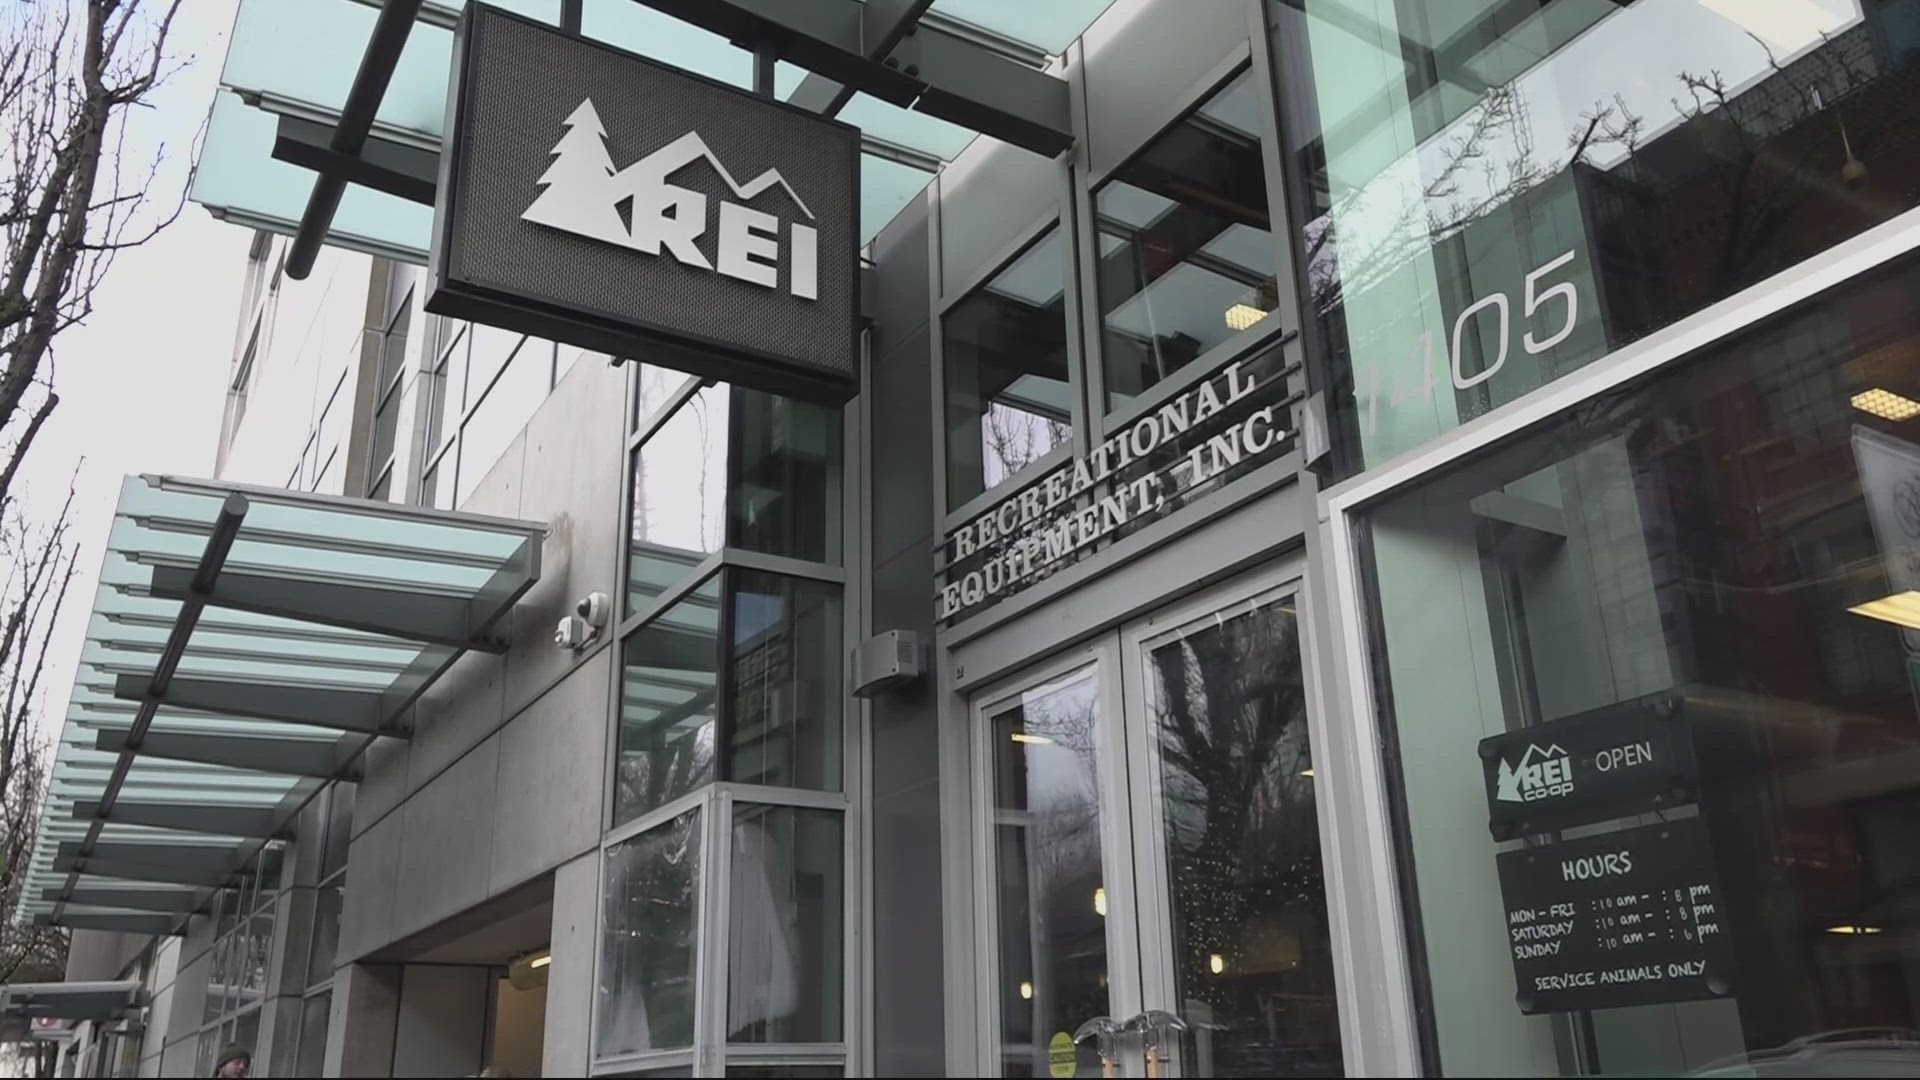 The new store will be located at Walker Center in Beaverton. This comes after the REI store in Portland's Pearl District closed back in February.